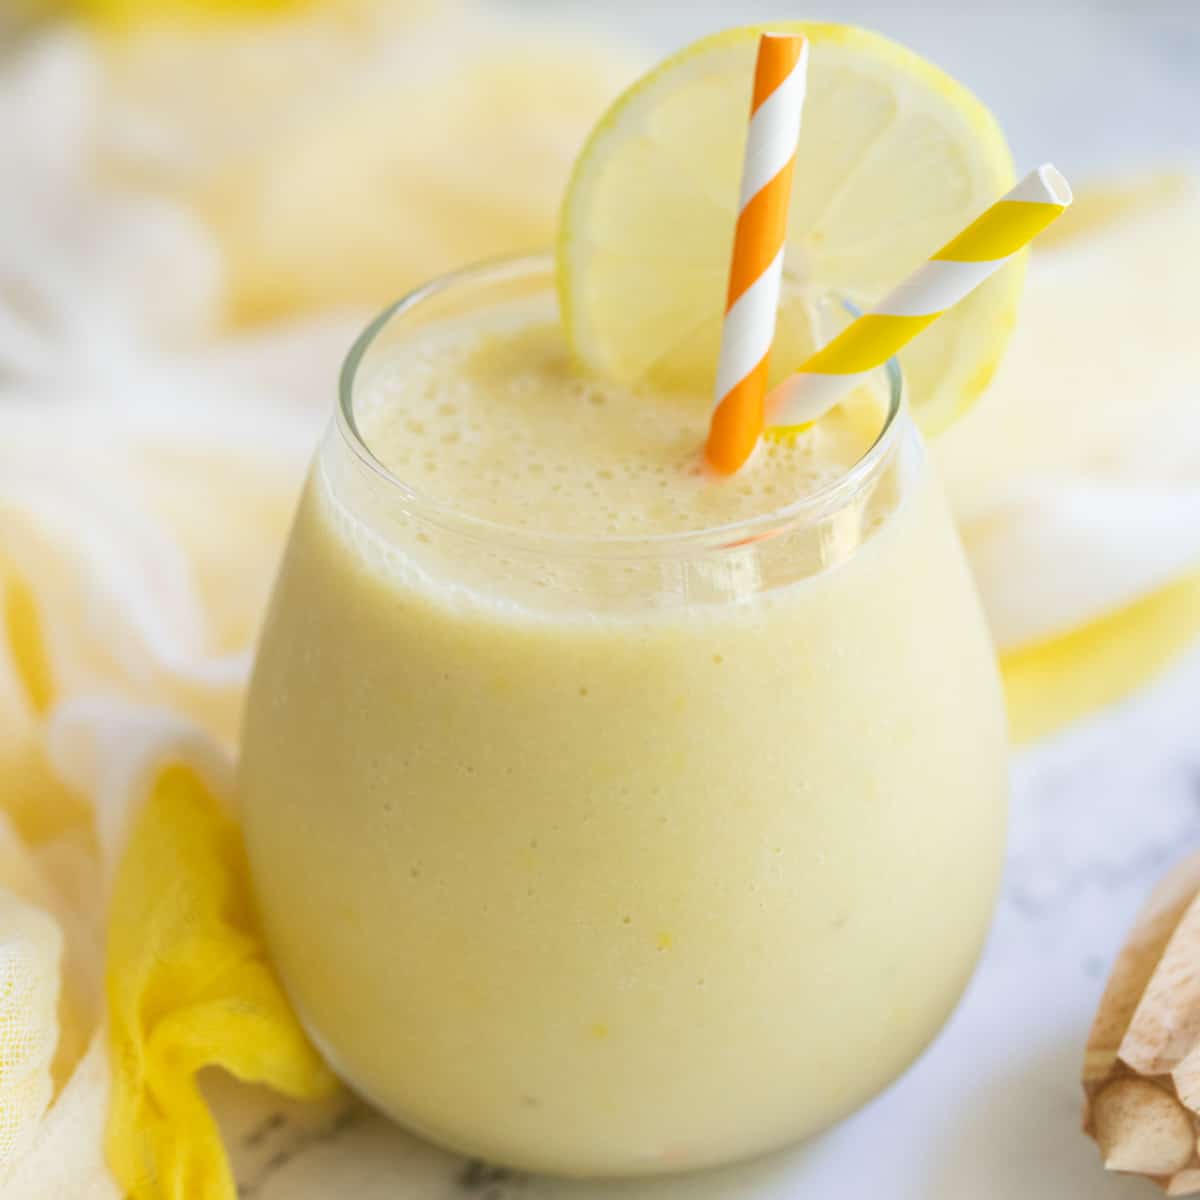 Lemon smoothie in glass served with lemon round.